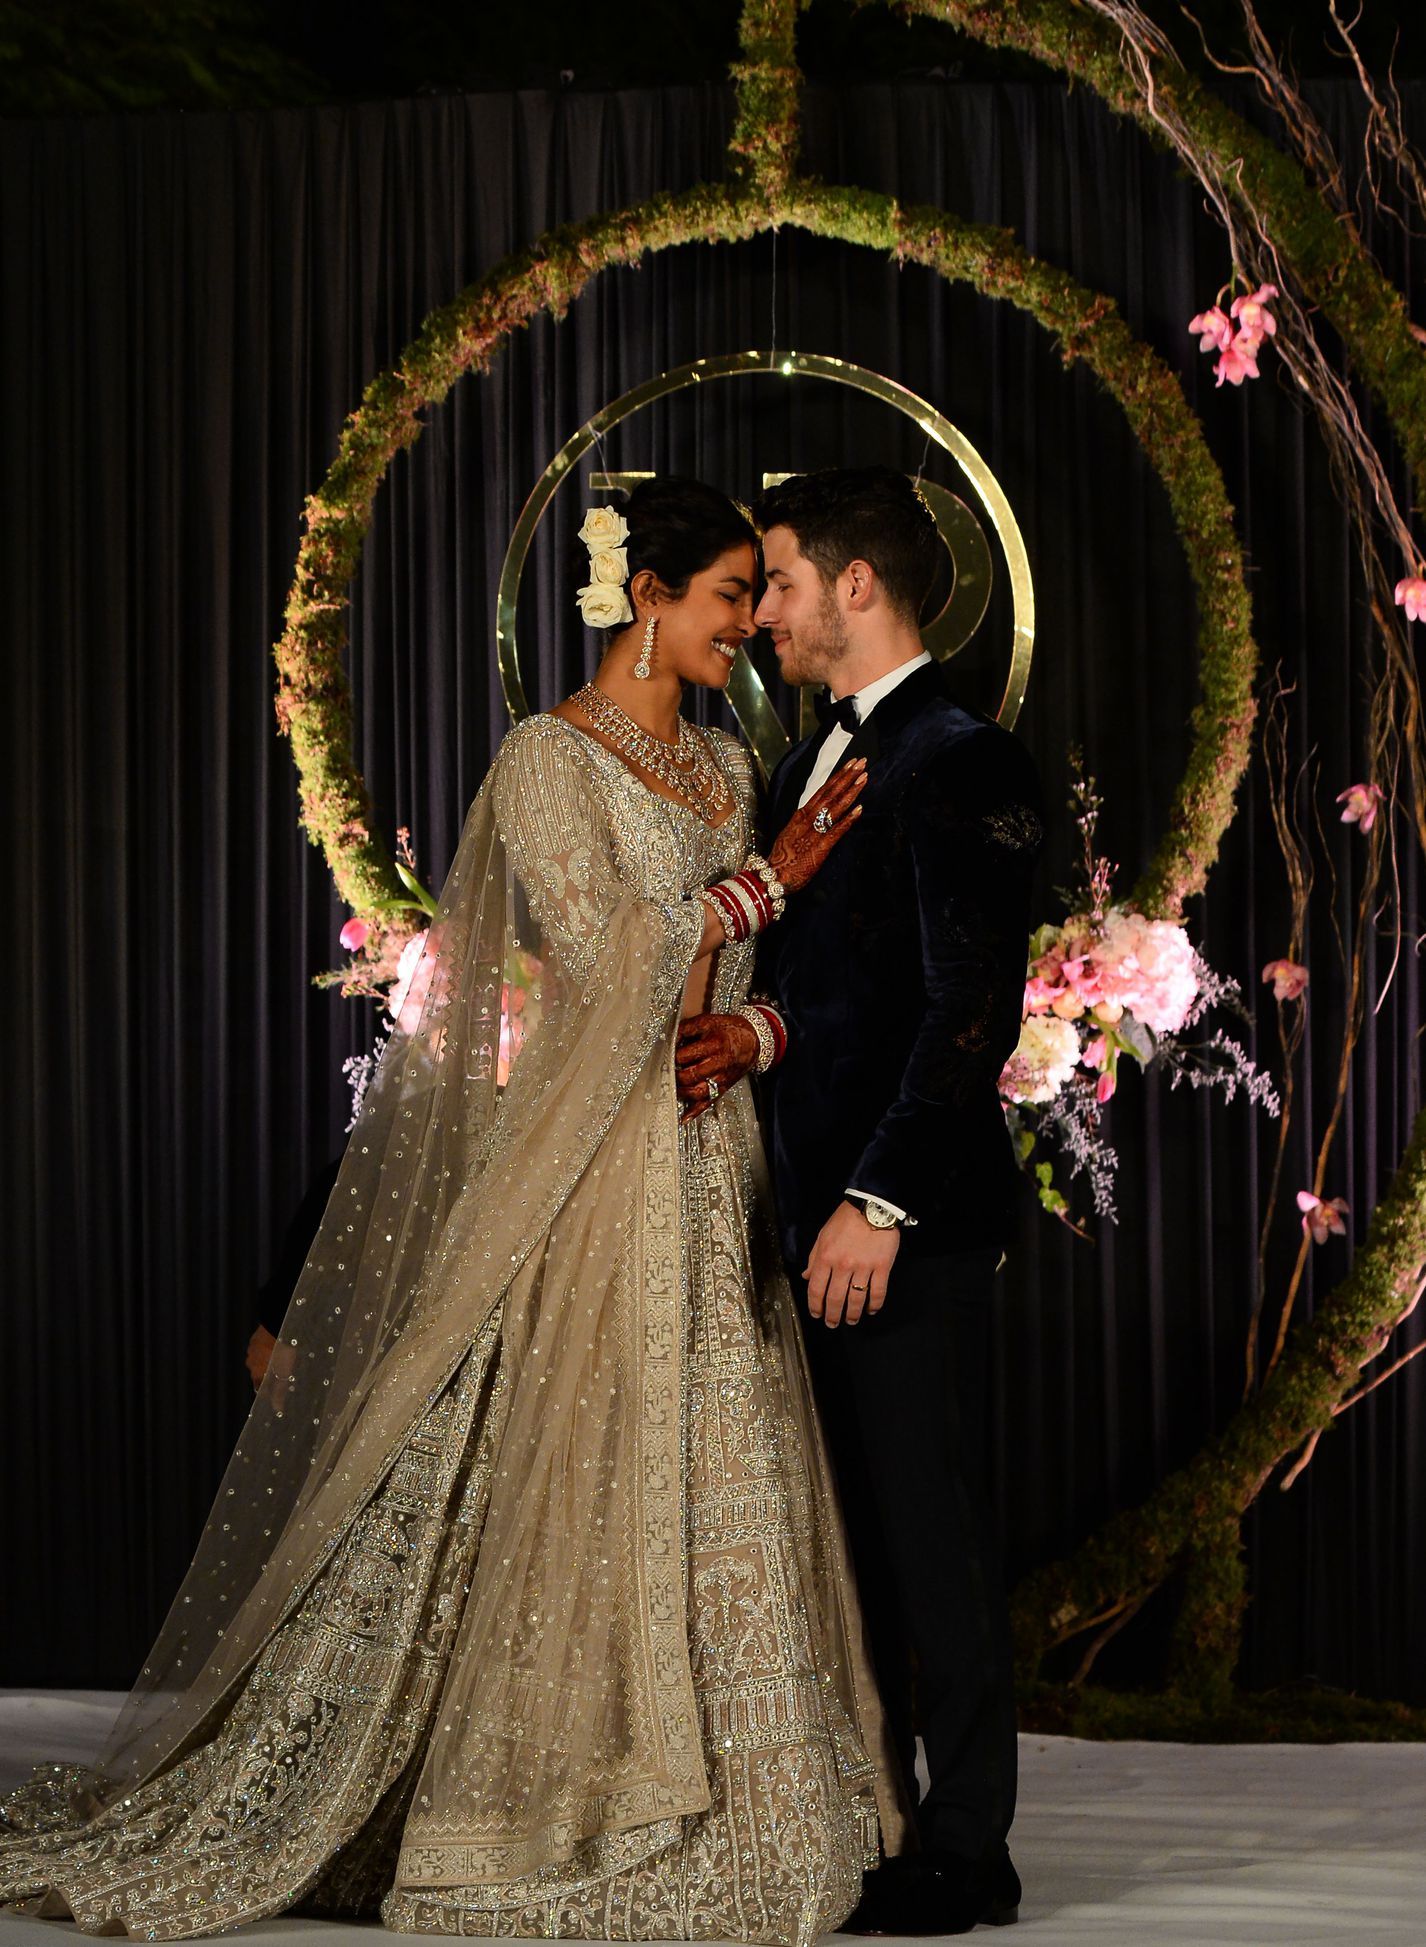 What to wear for an Indian Wedding as a Guest?